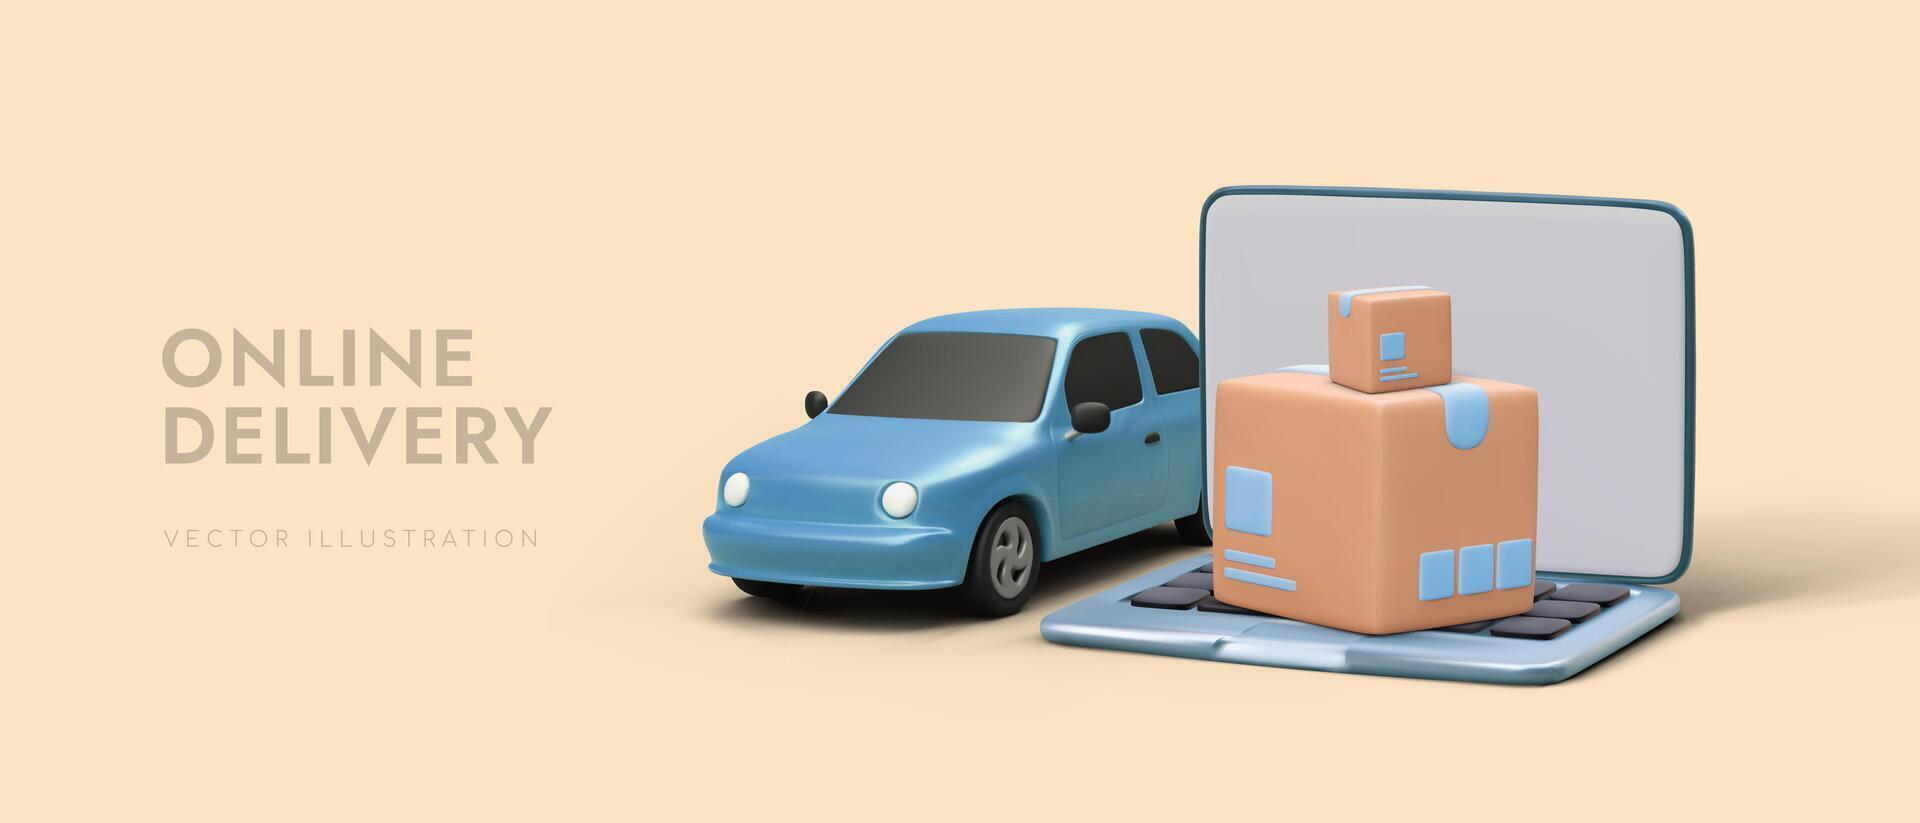 Advertising poster for online delivery company with 3d cartoon car, laptop and boxes vector